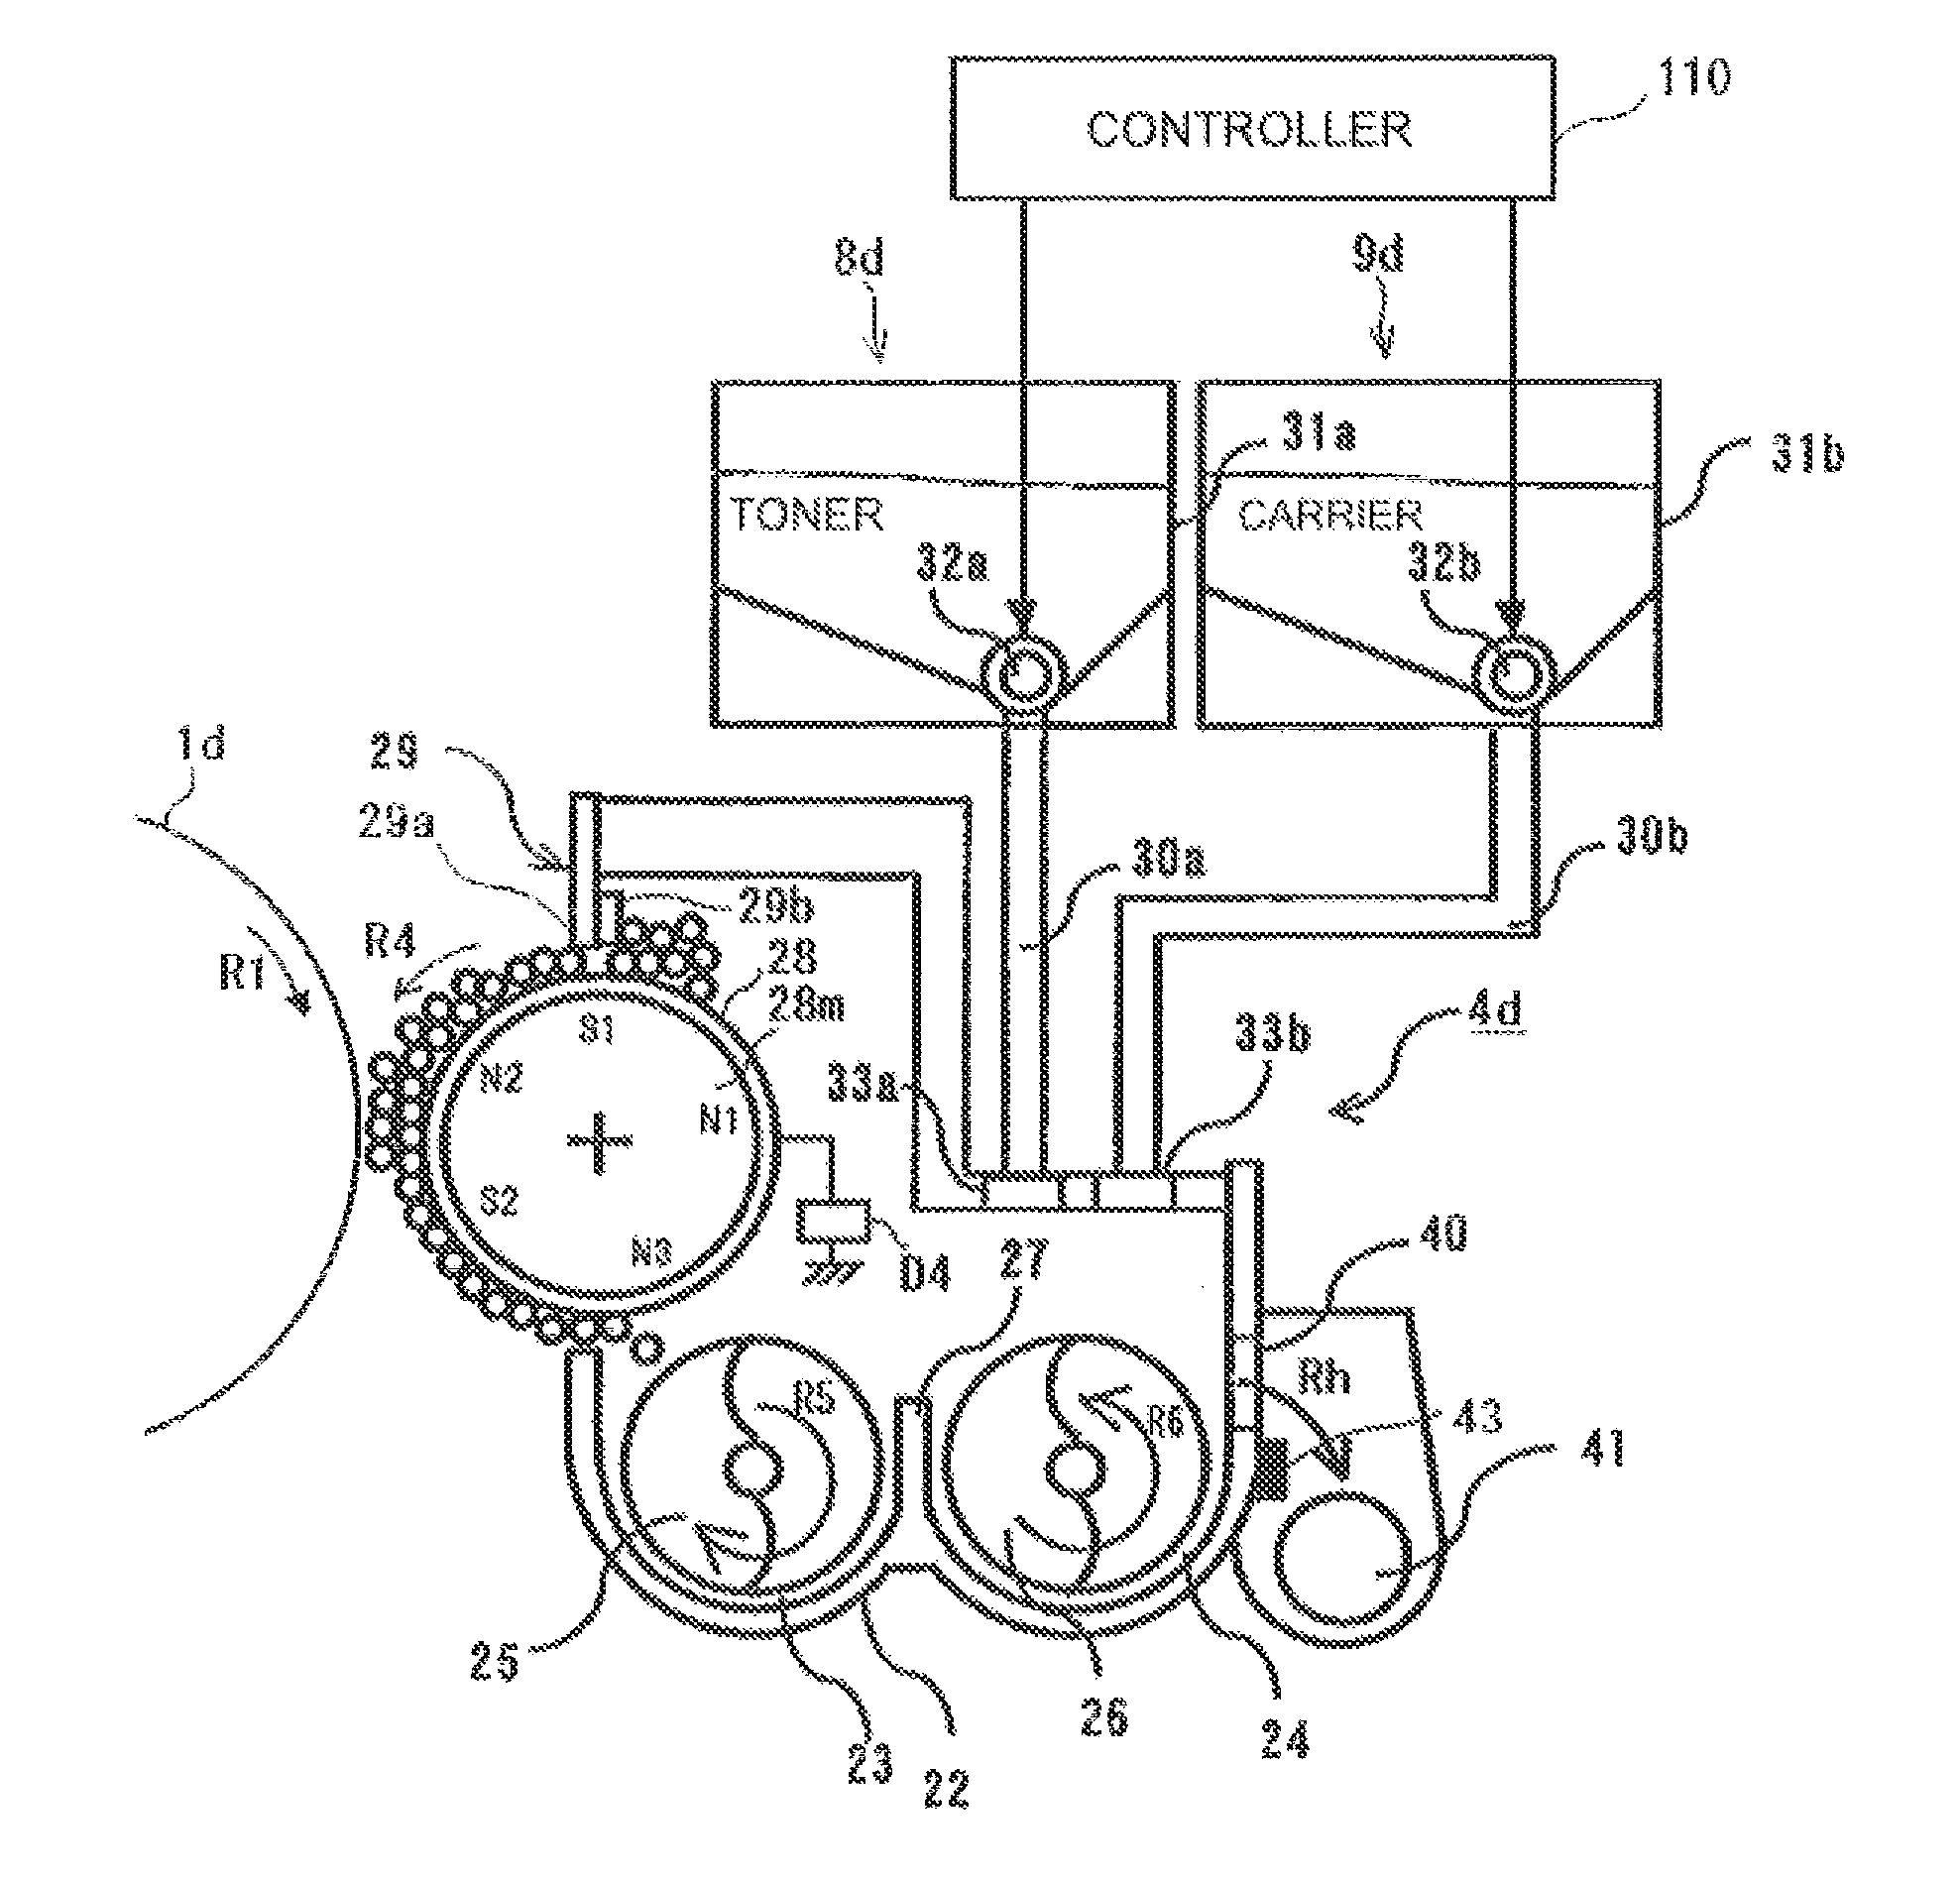 Image forming apparatus featuring supply of developers having different toner ratios